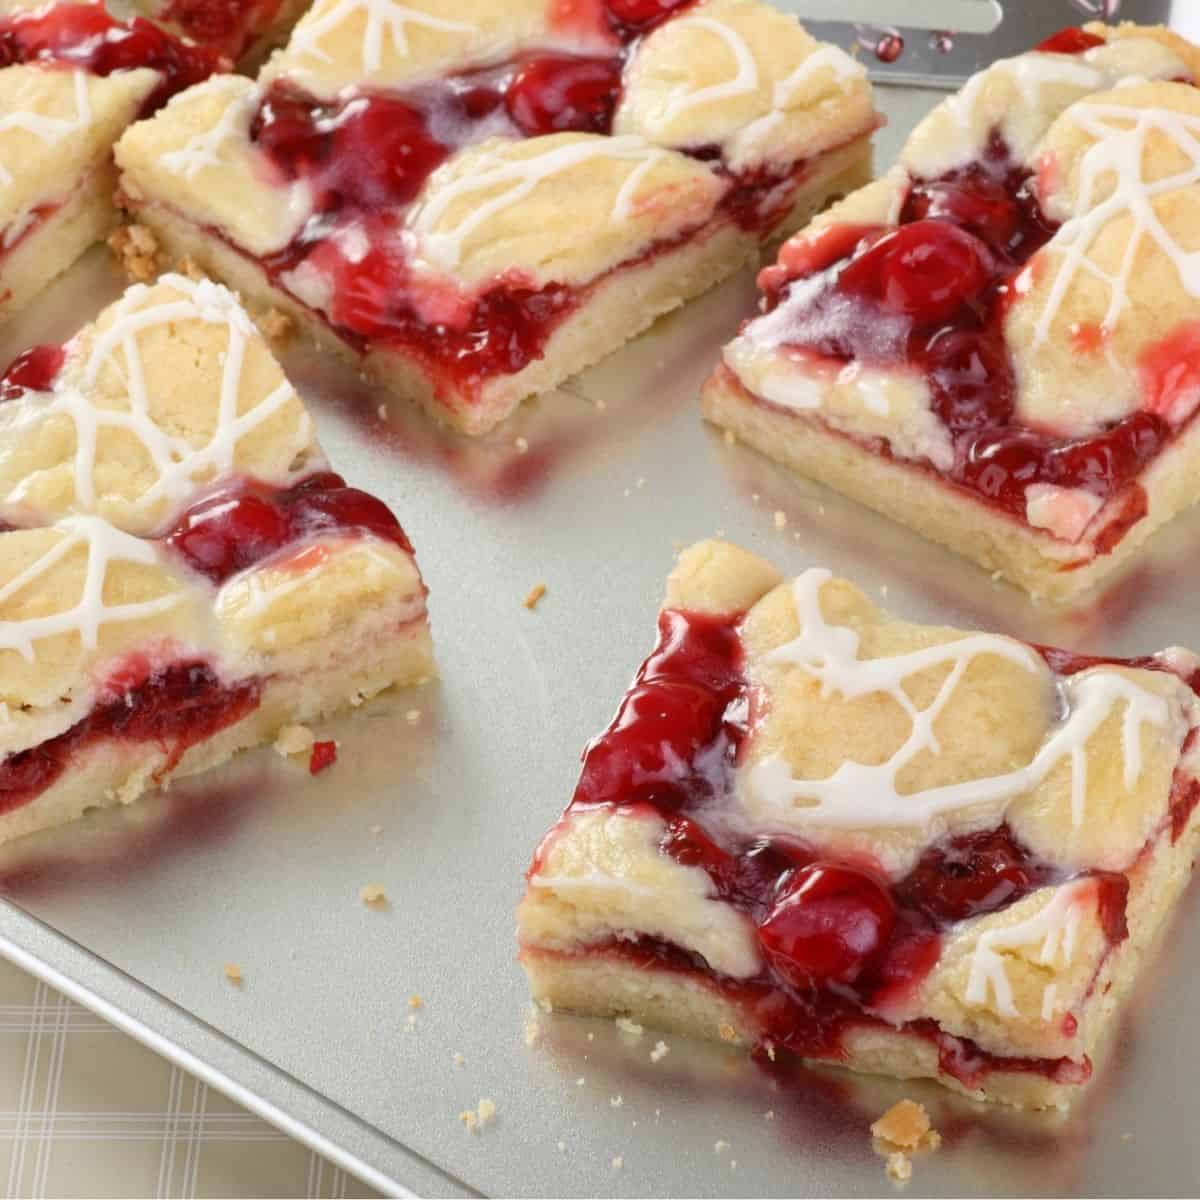 Several cherry bars drizzled with a white chocolate glaze on a baking sheet.